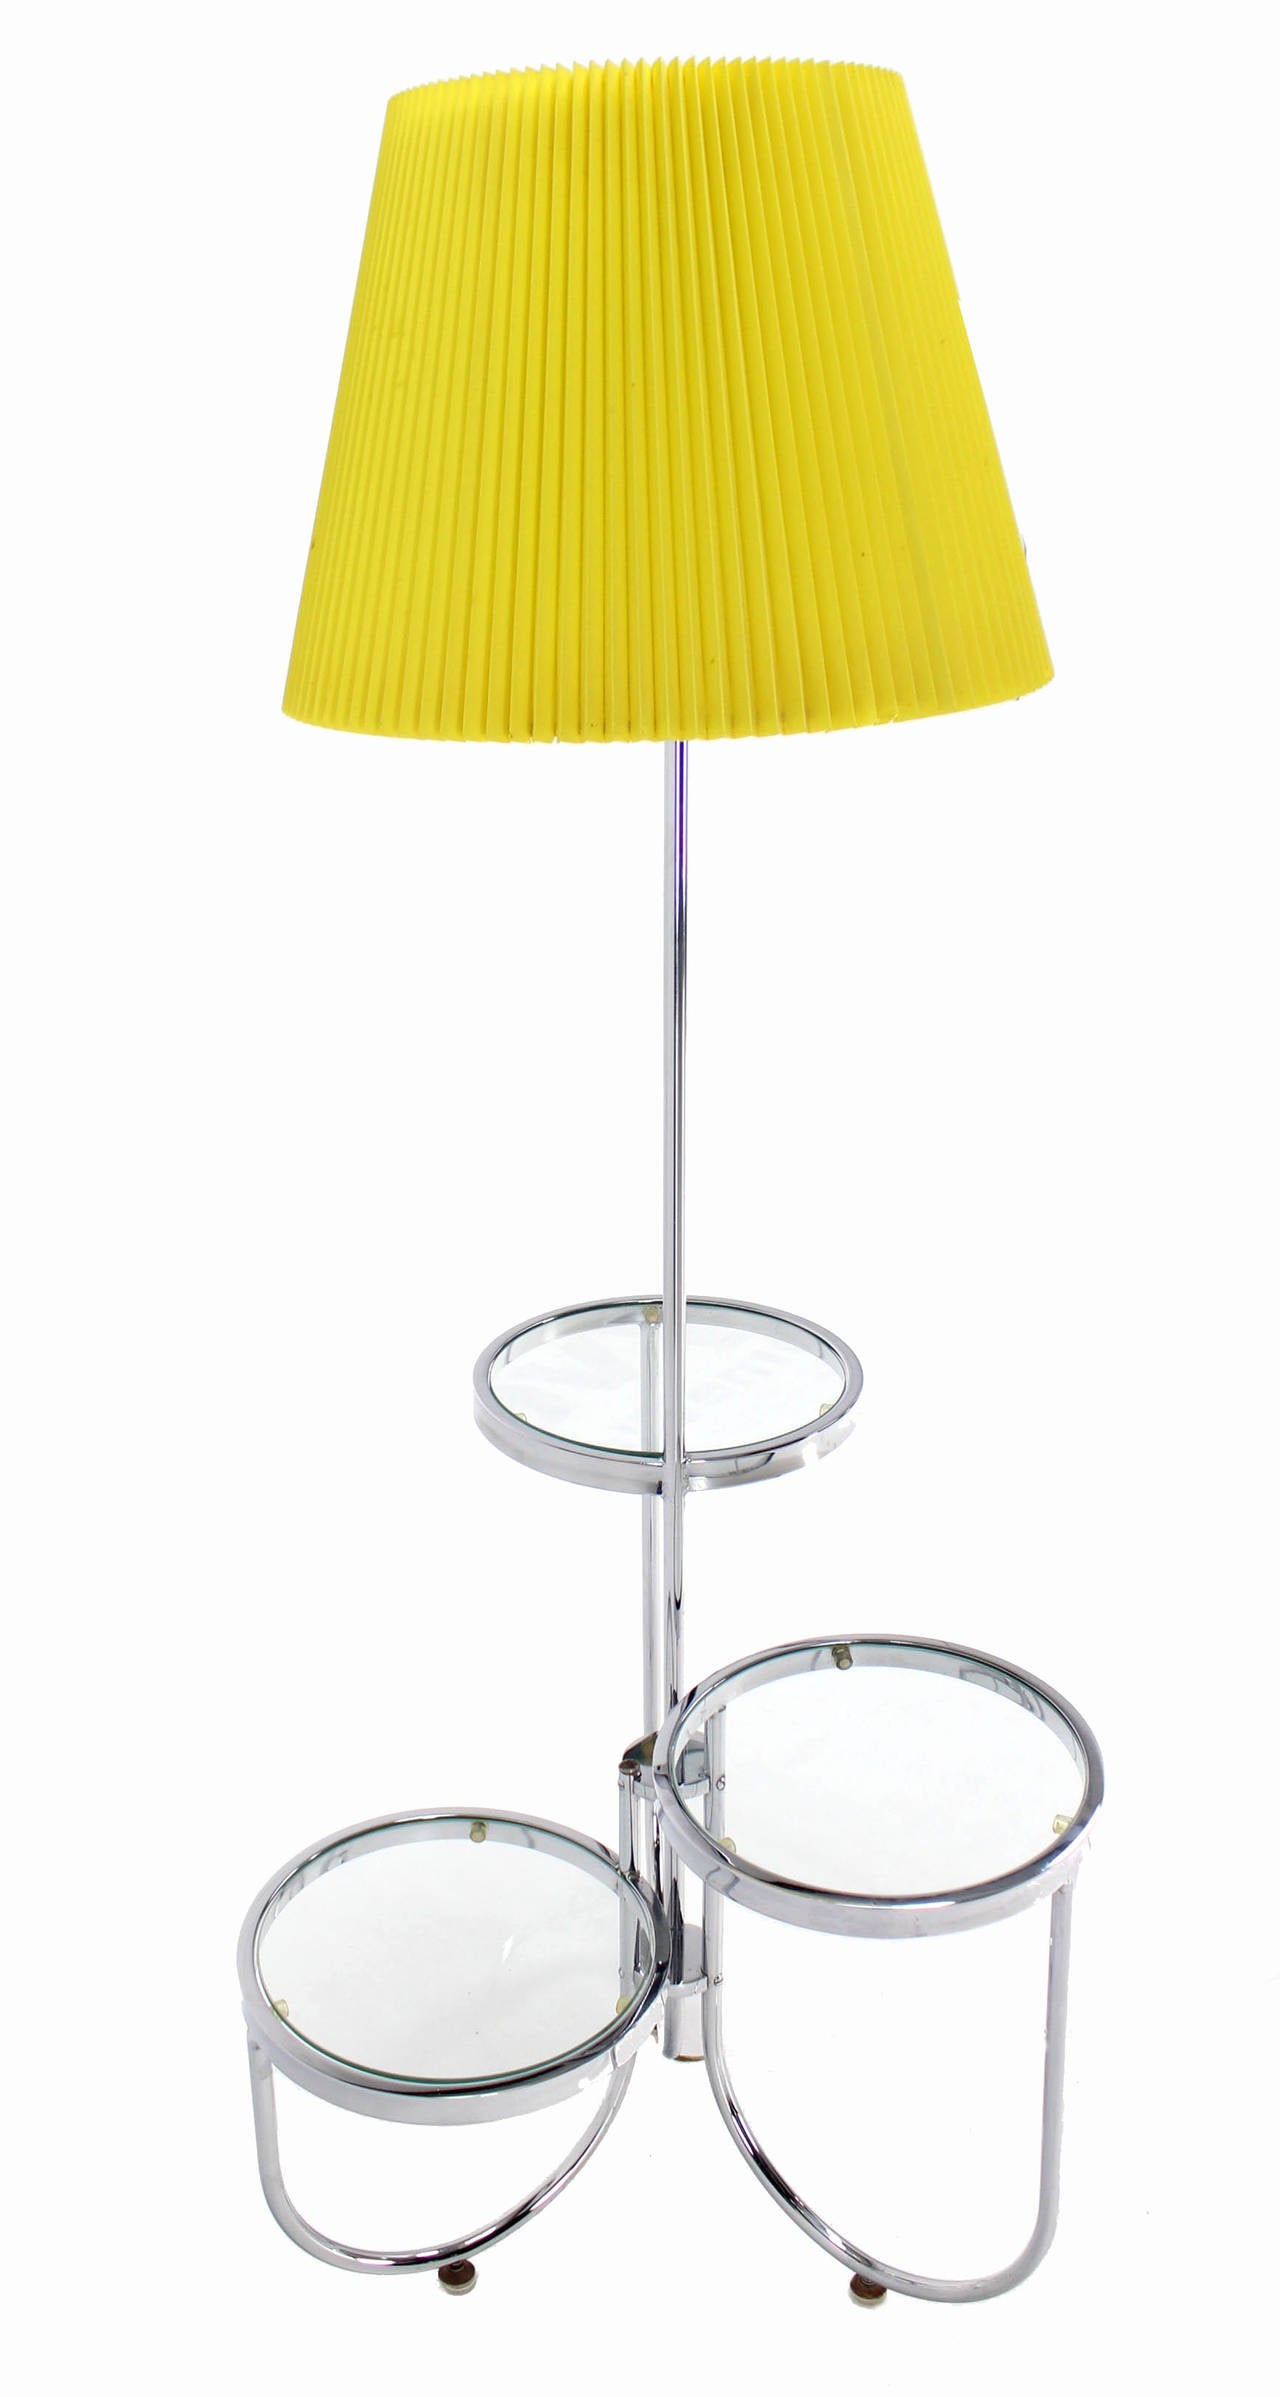 Glass Chrome Floor Lamp with Three Circular Built-In Stand Tables